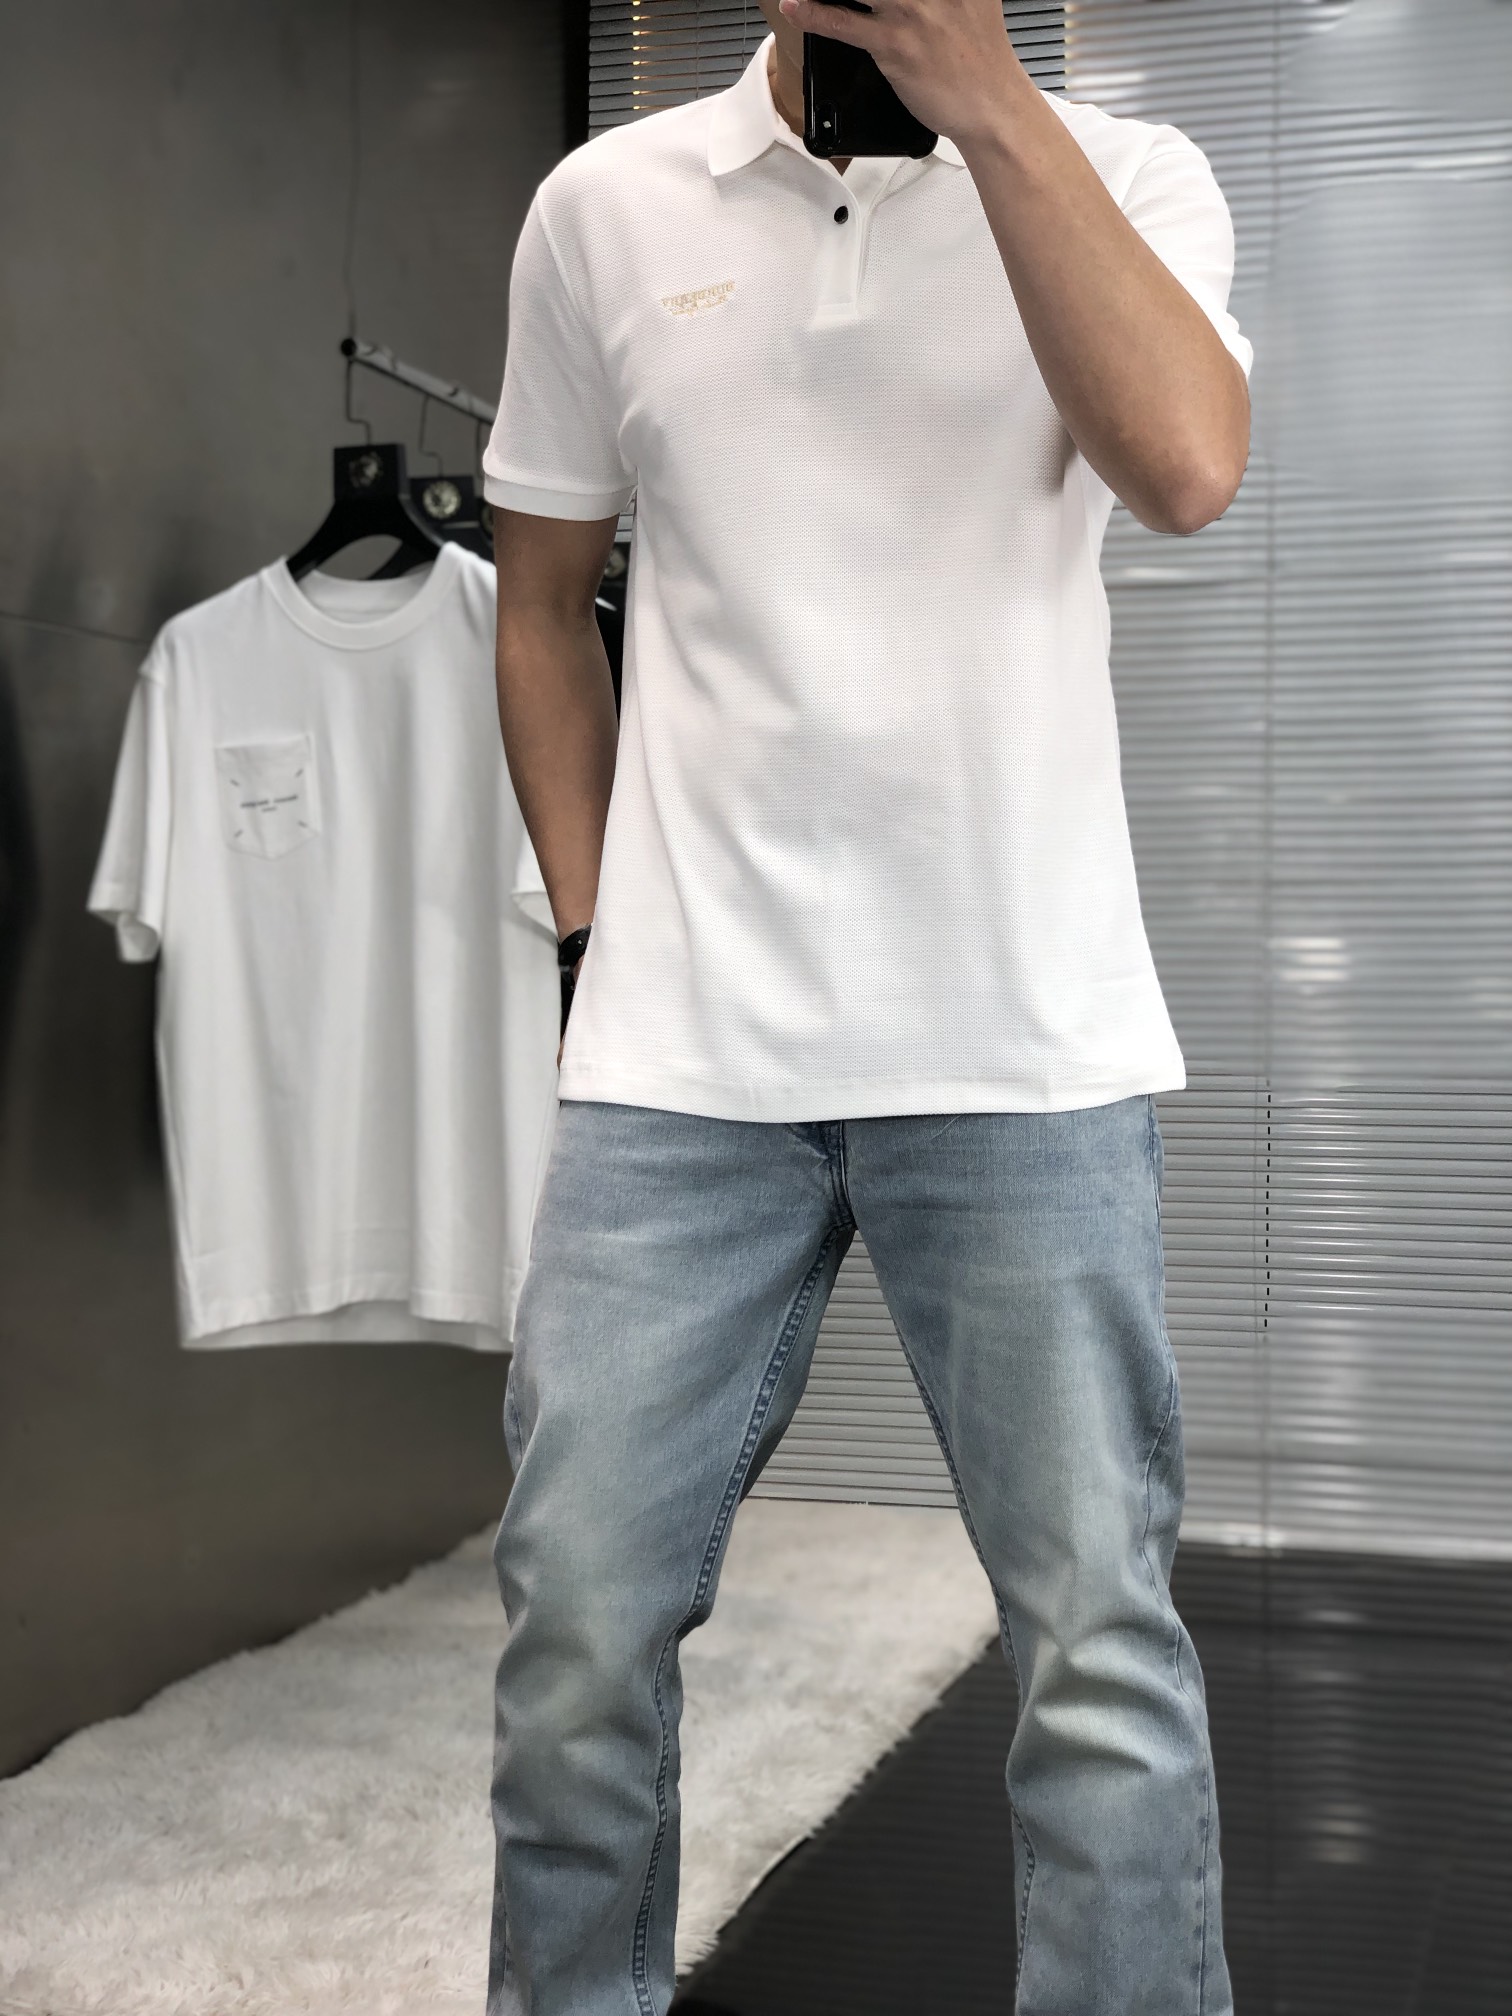 Replica Wholesale
 Burberry Clothing Polo T-Shirt Embroidery Men Cotton Spring/Summer Collection Fashion Short Sleeve